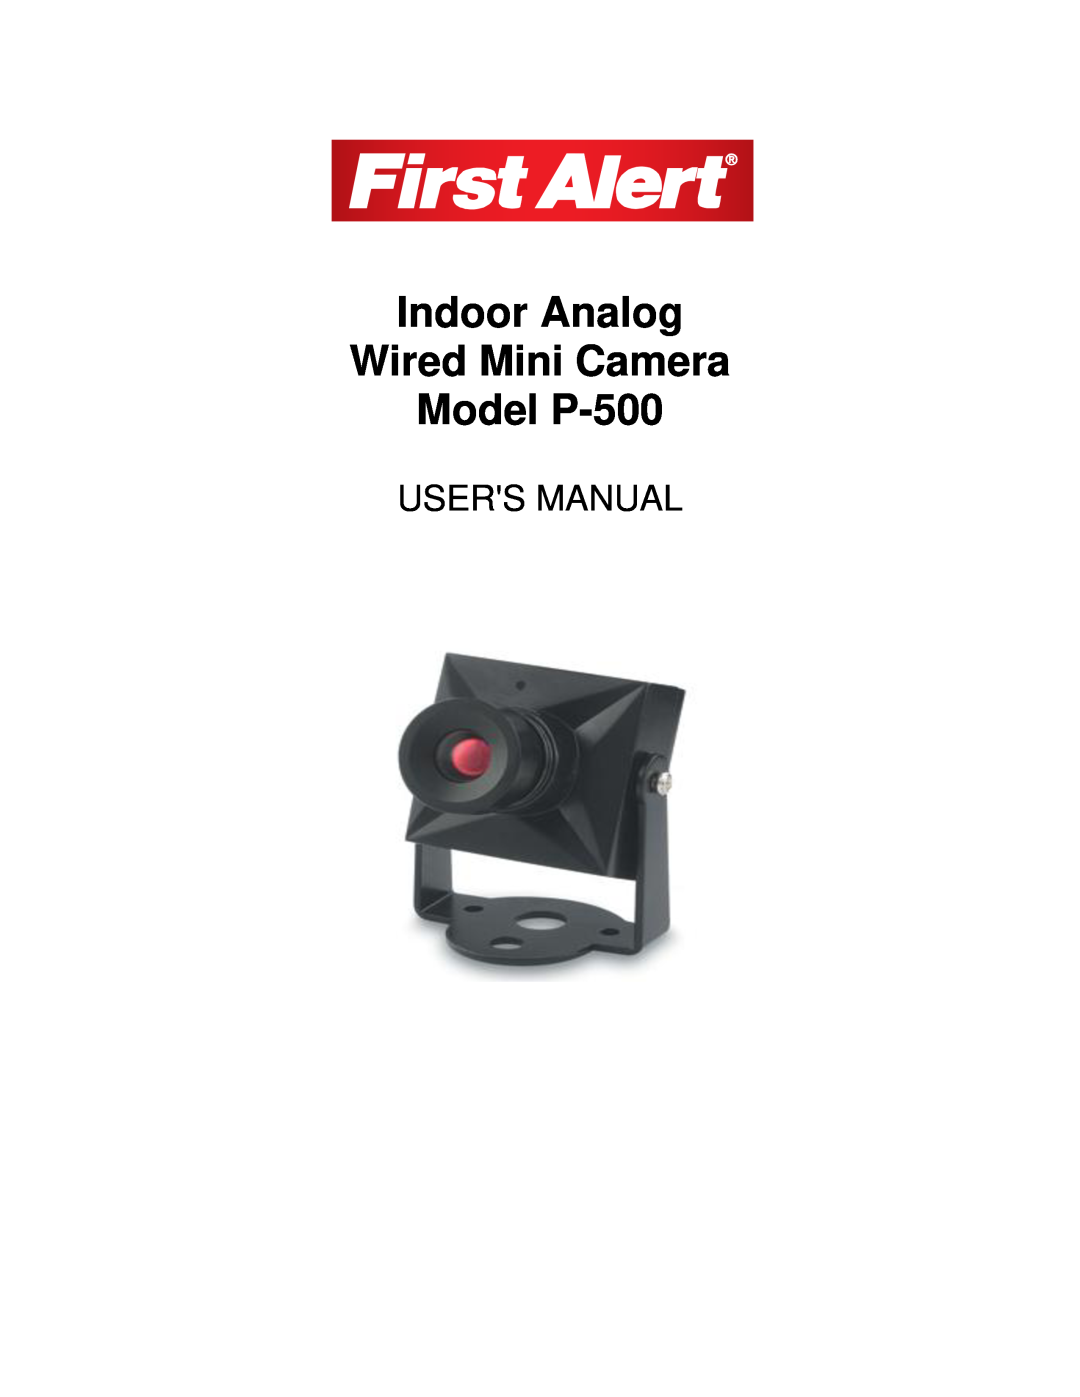 First Alert user manual Indoor Analog Wired Mini Camera Model P-500 